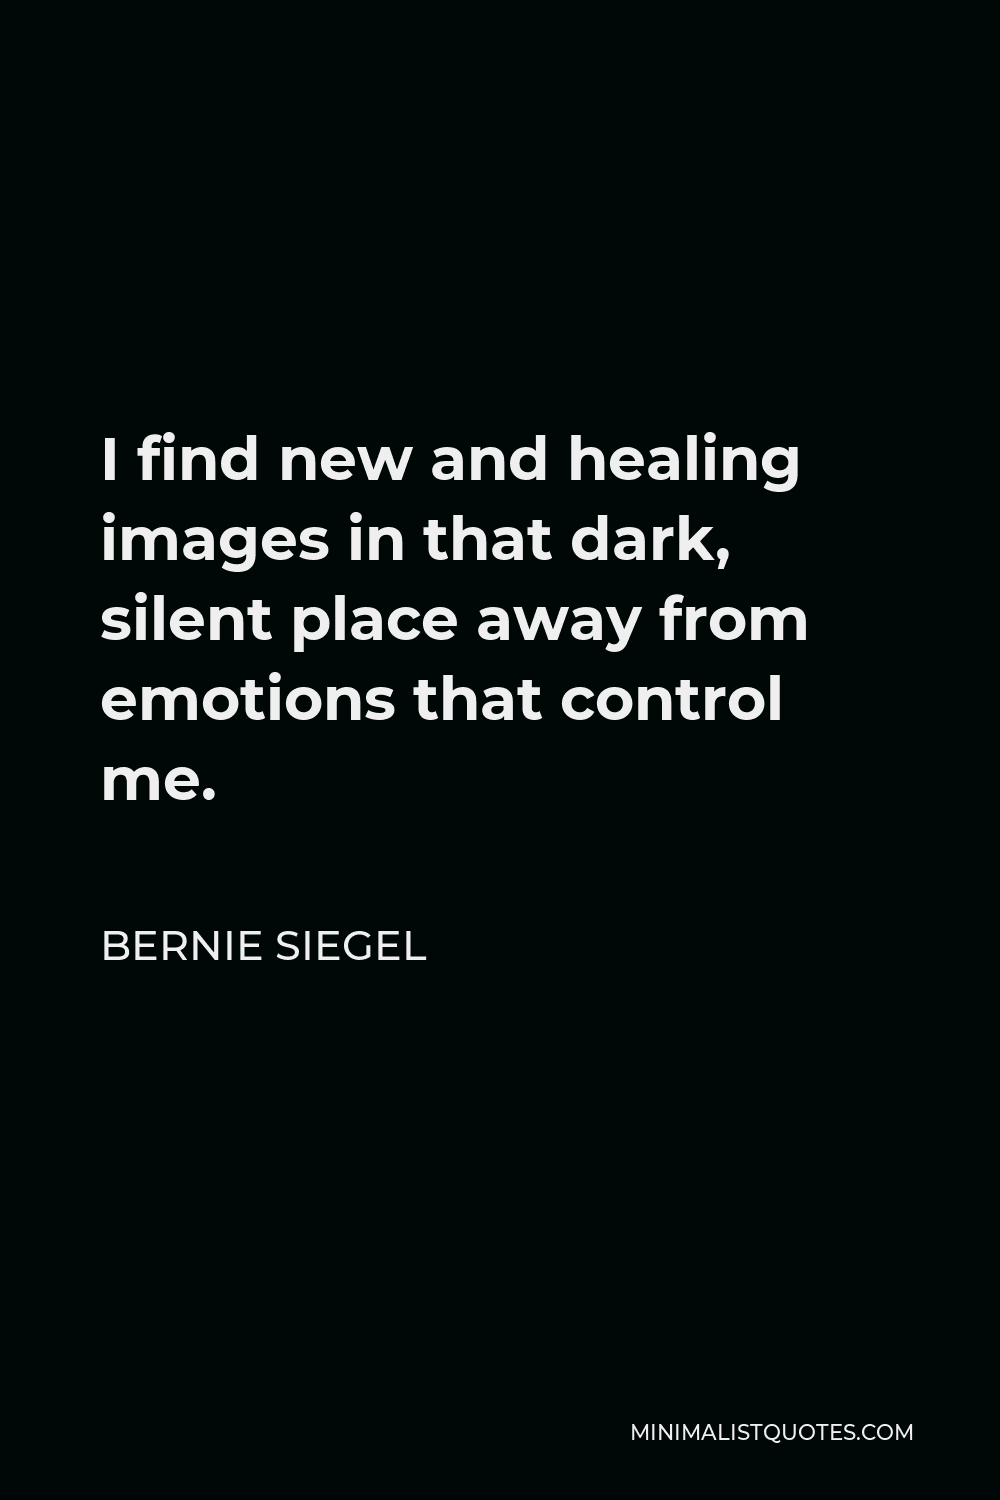 Bernie Siegel Quote - I find new and healing images in that dark, silent place away from emotions that control me.